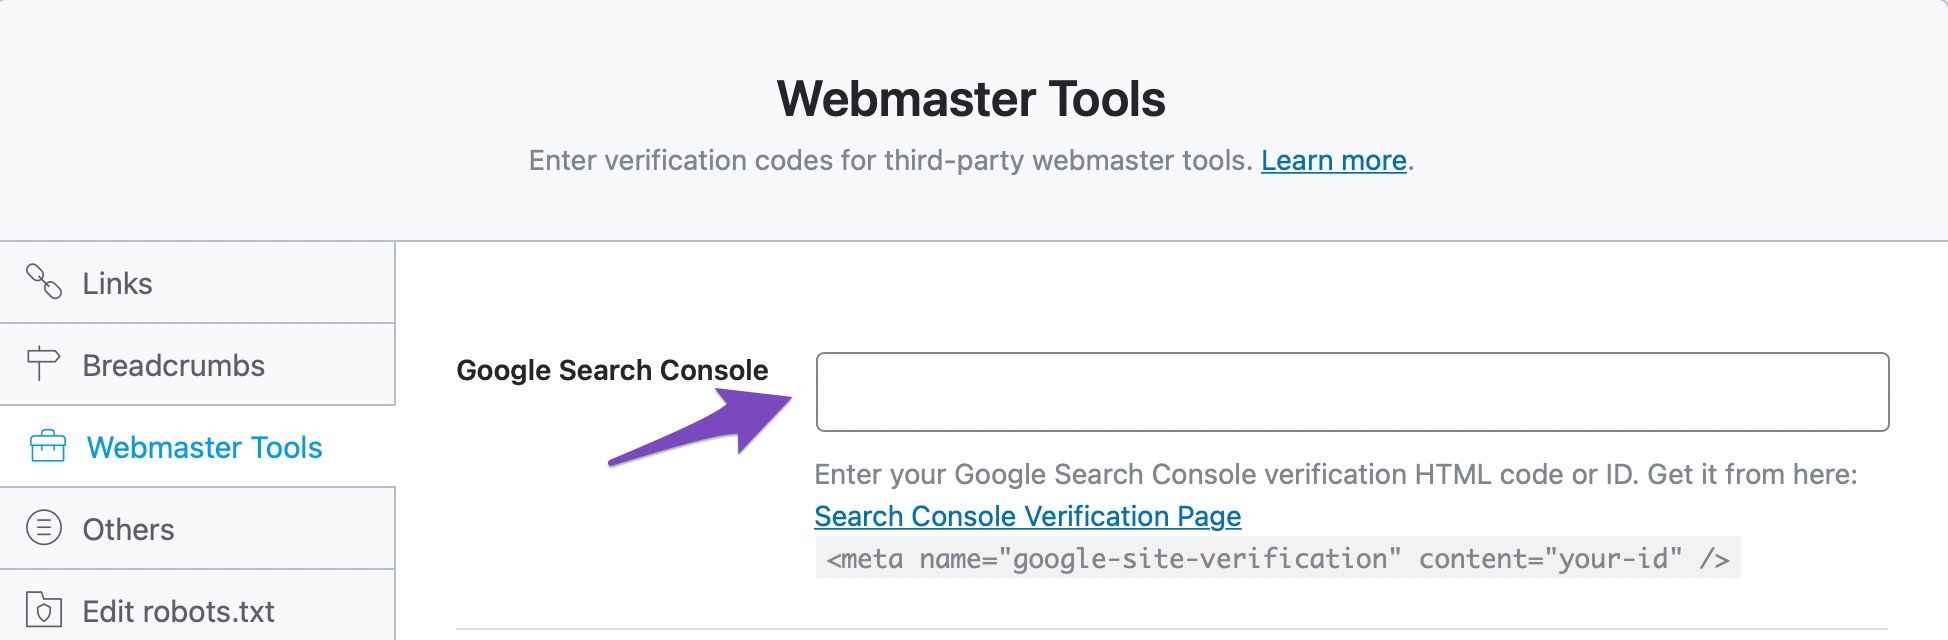 Navigate to the Webmaster Tools